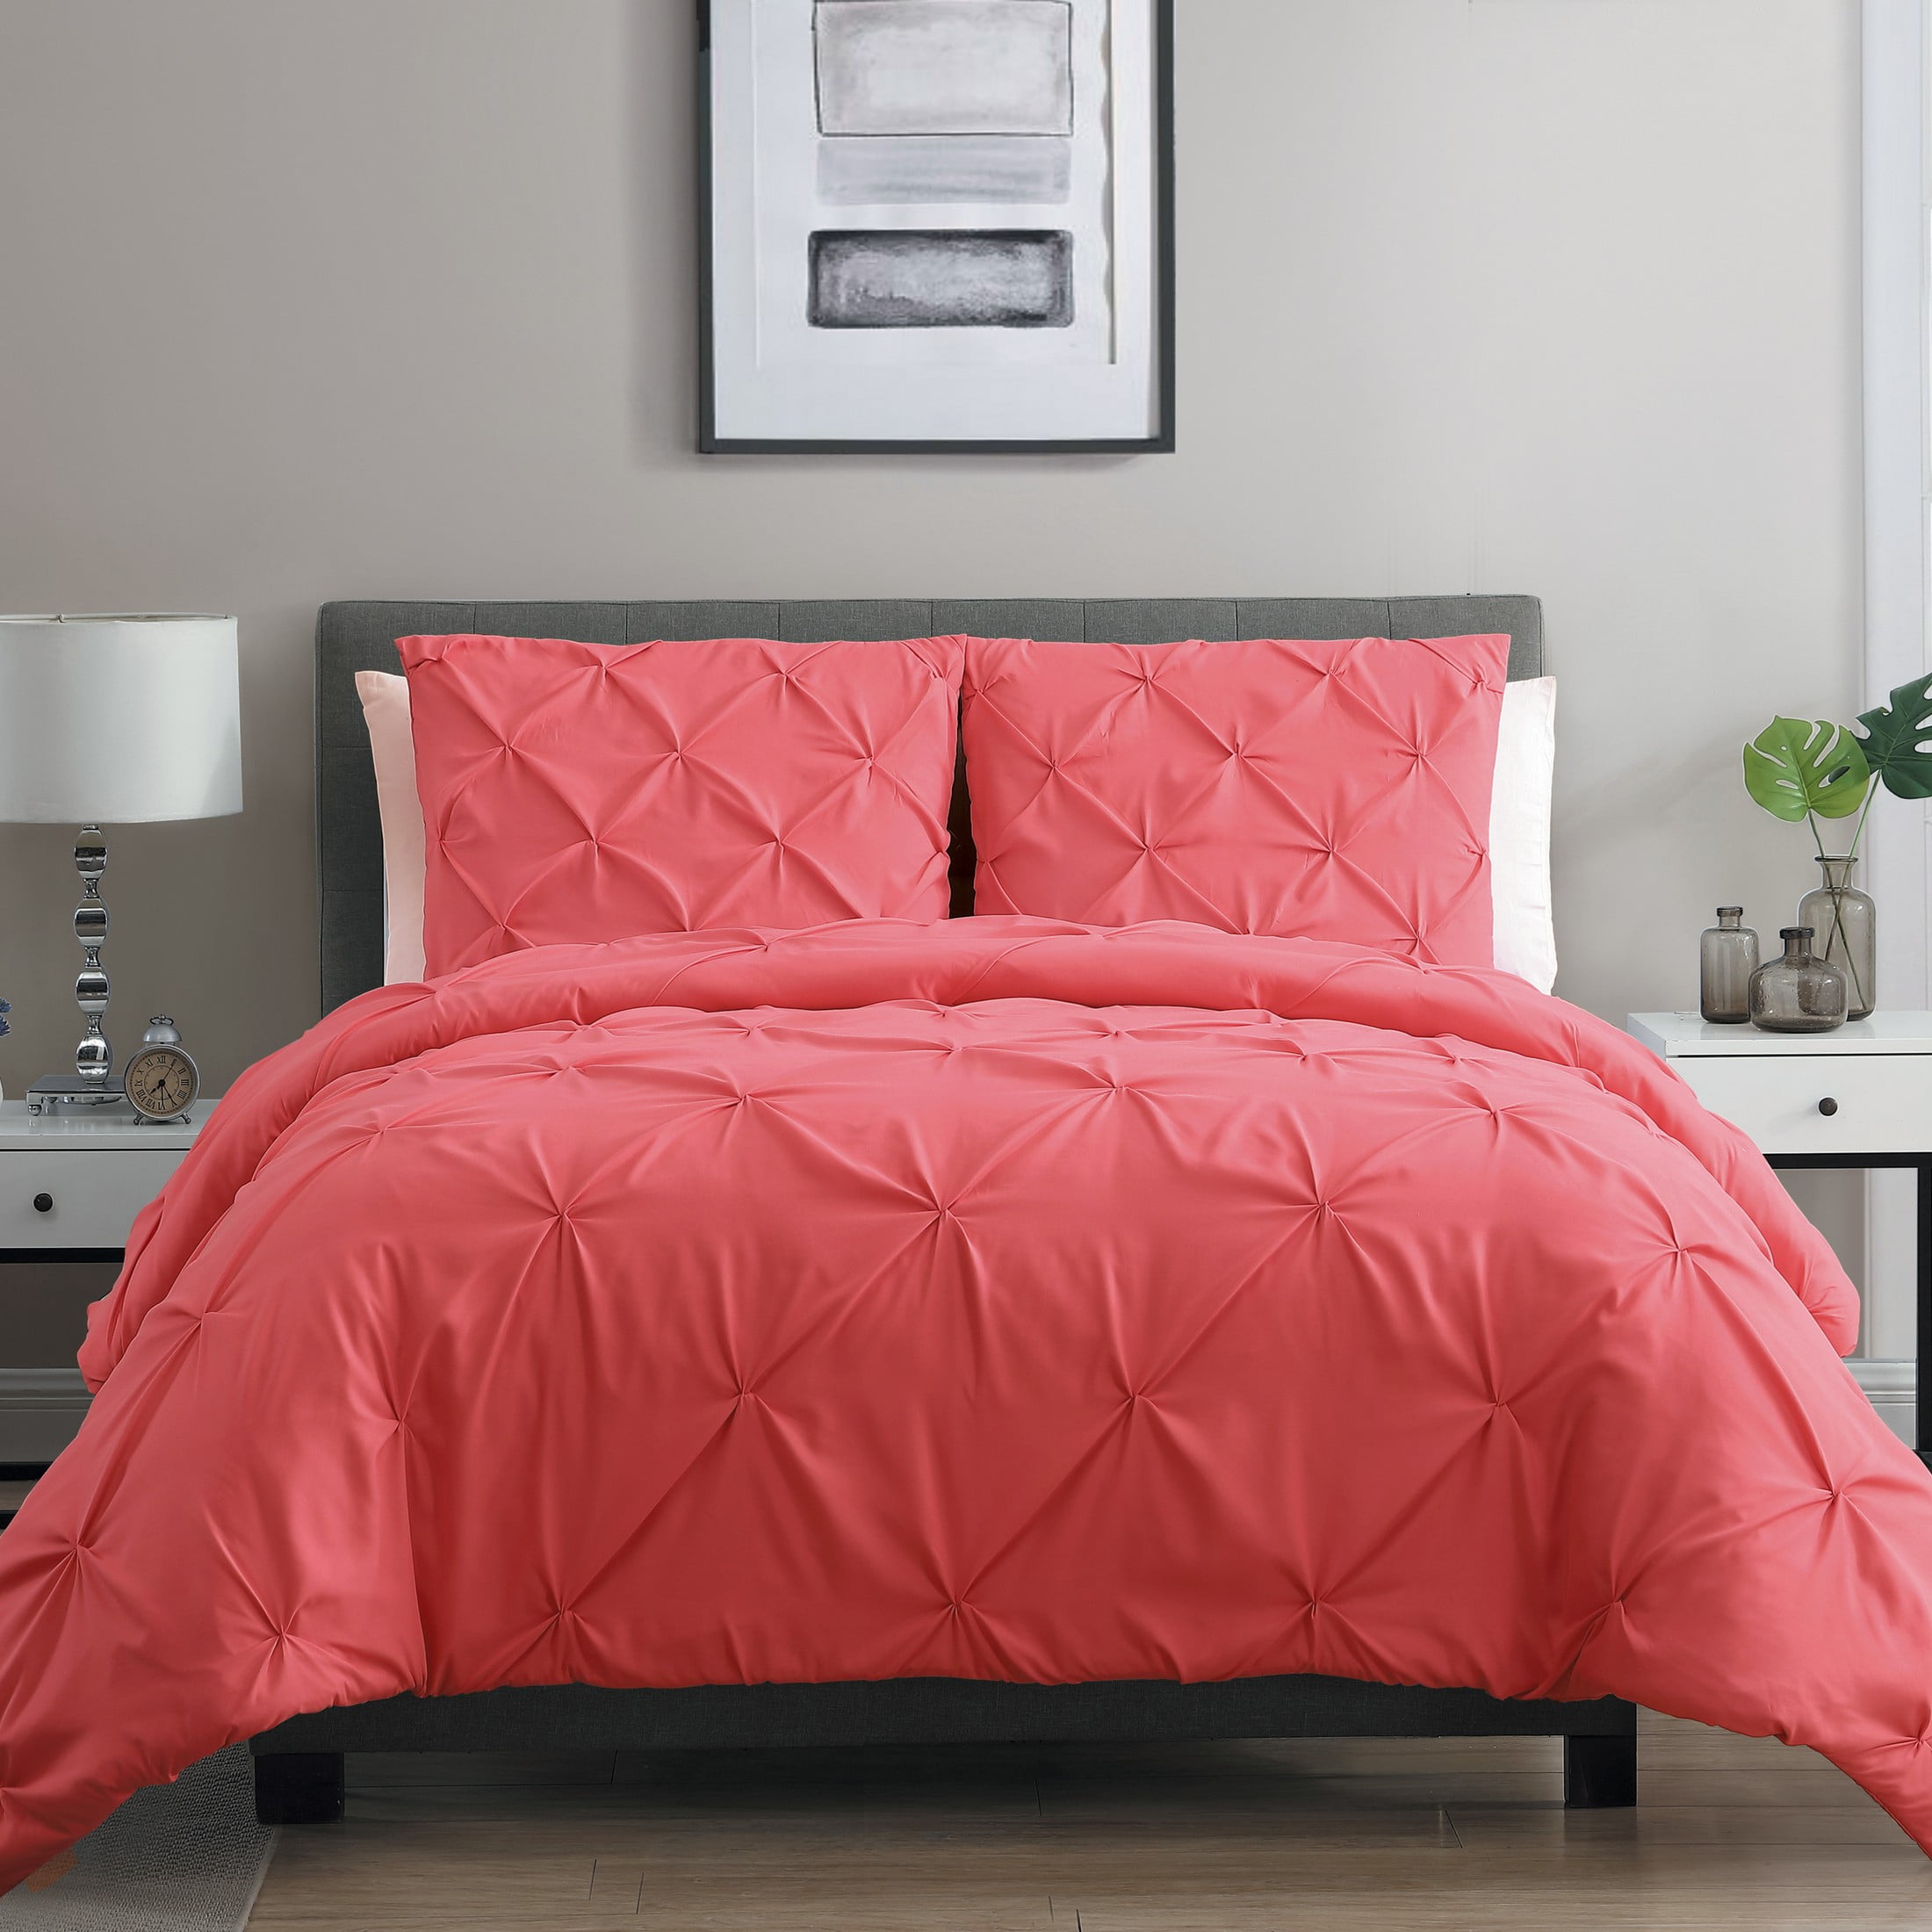 Plain Duvet Quilt Cover Bedding Set with Pleated Pintuck Border in 2 colours 